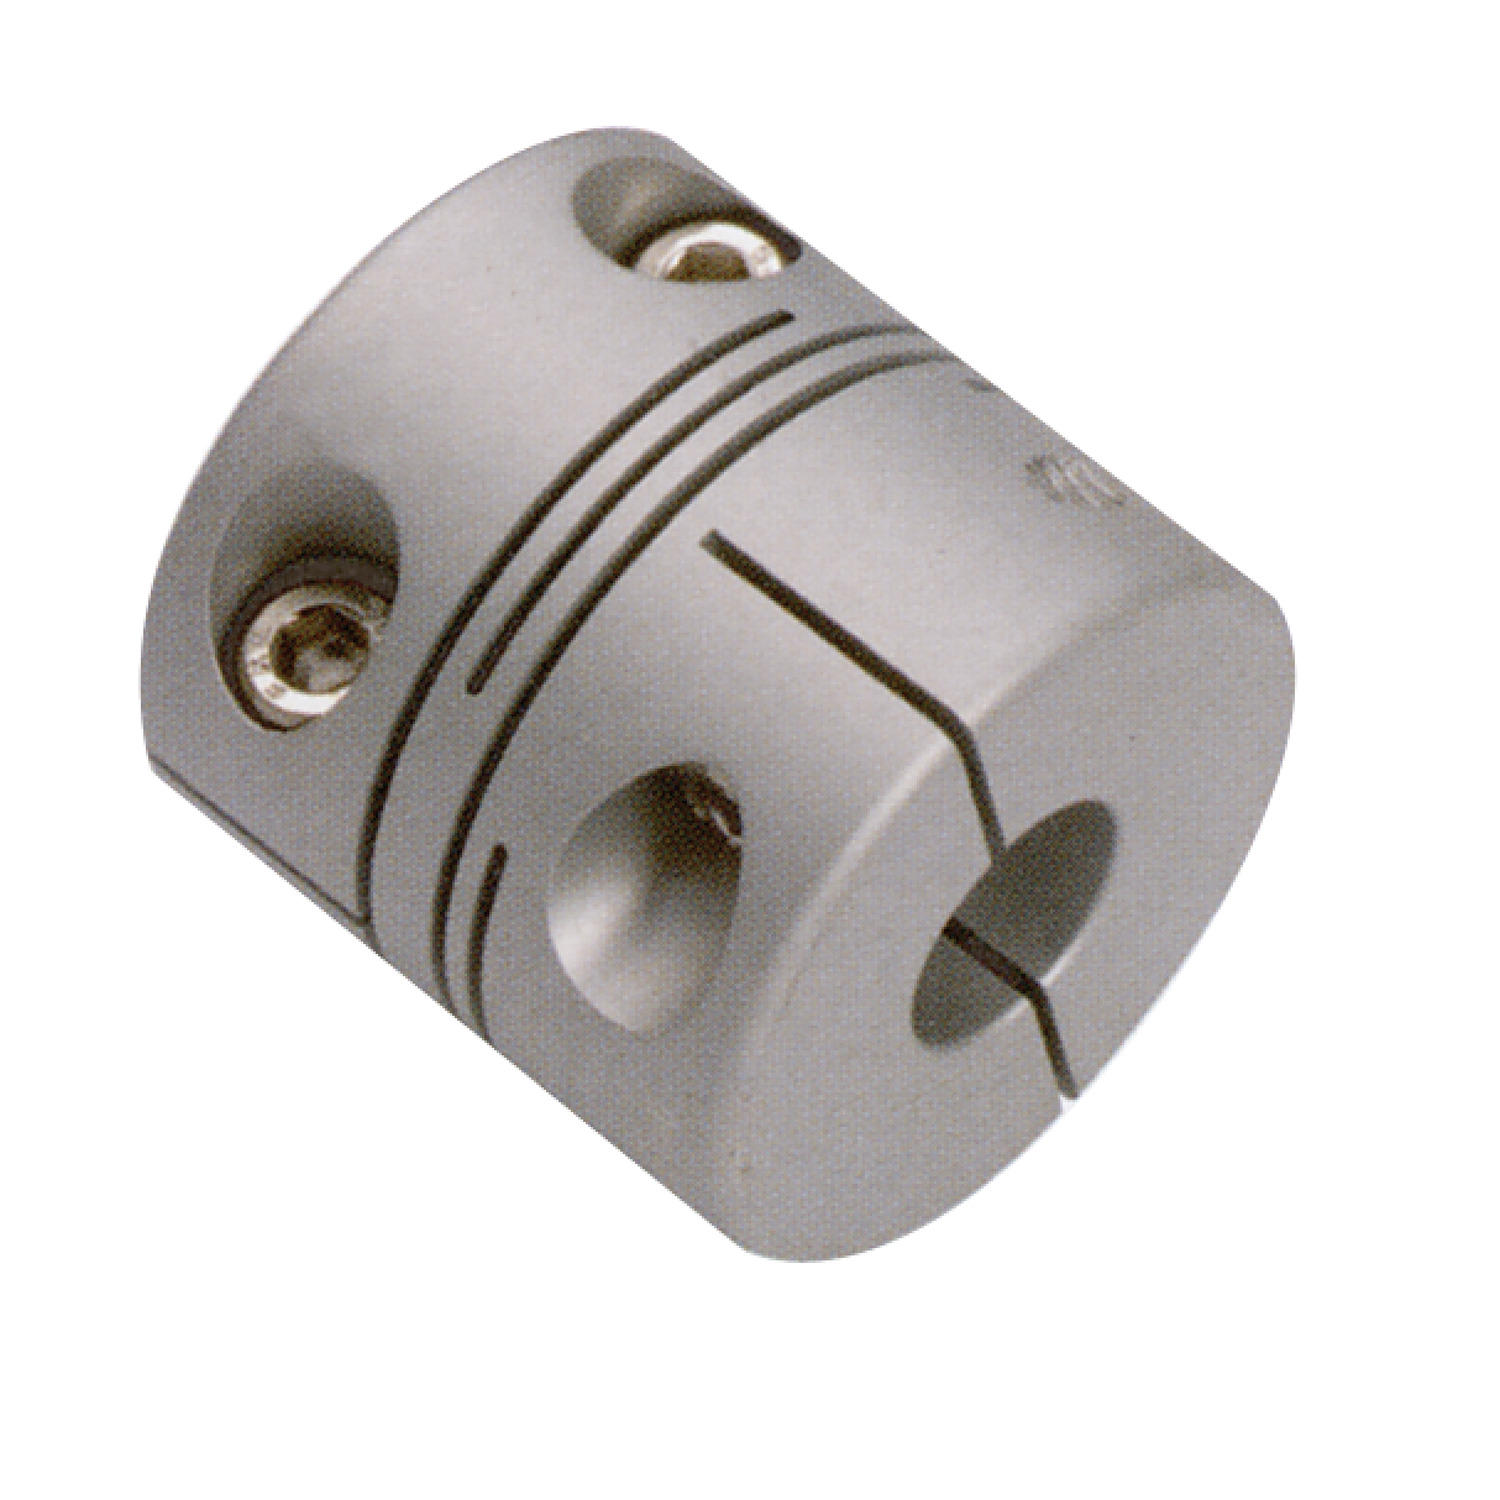 Product R3007, Beamed Coupling - three beam stainless steel, set screw type / 